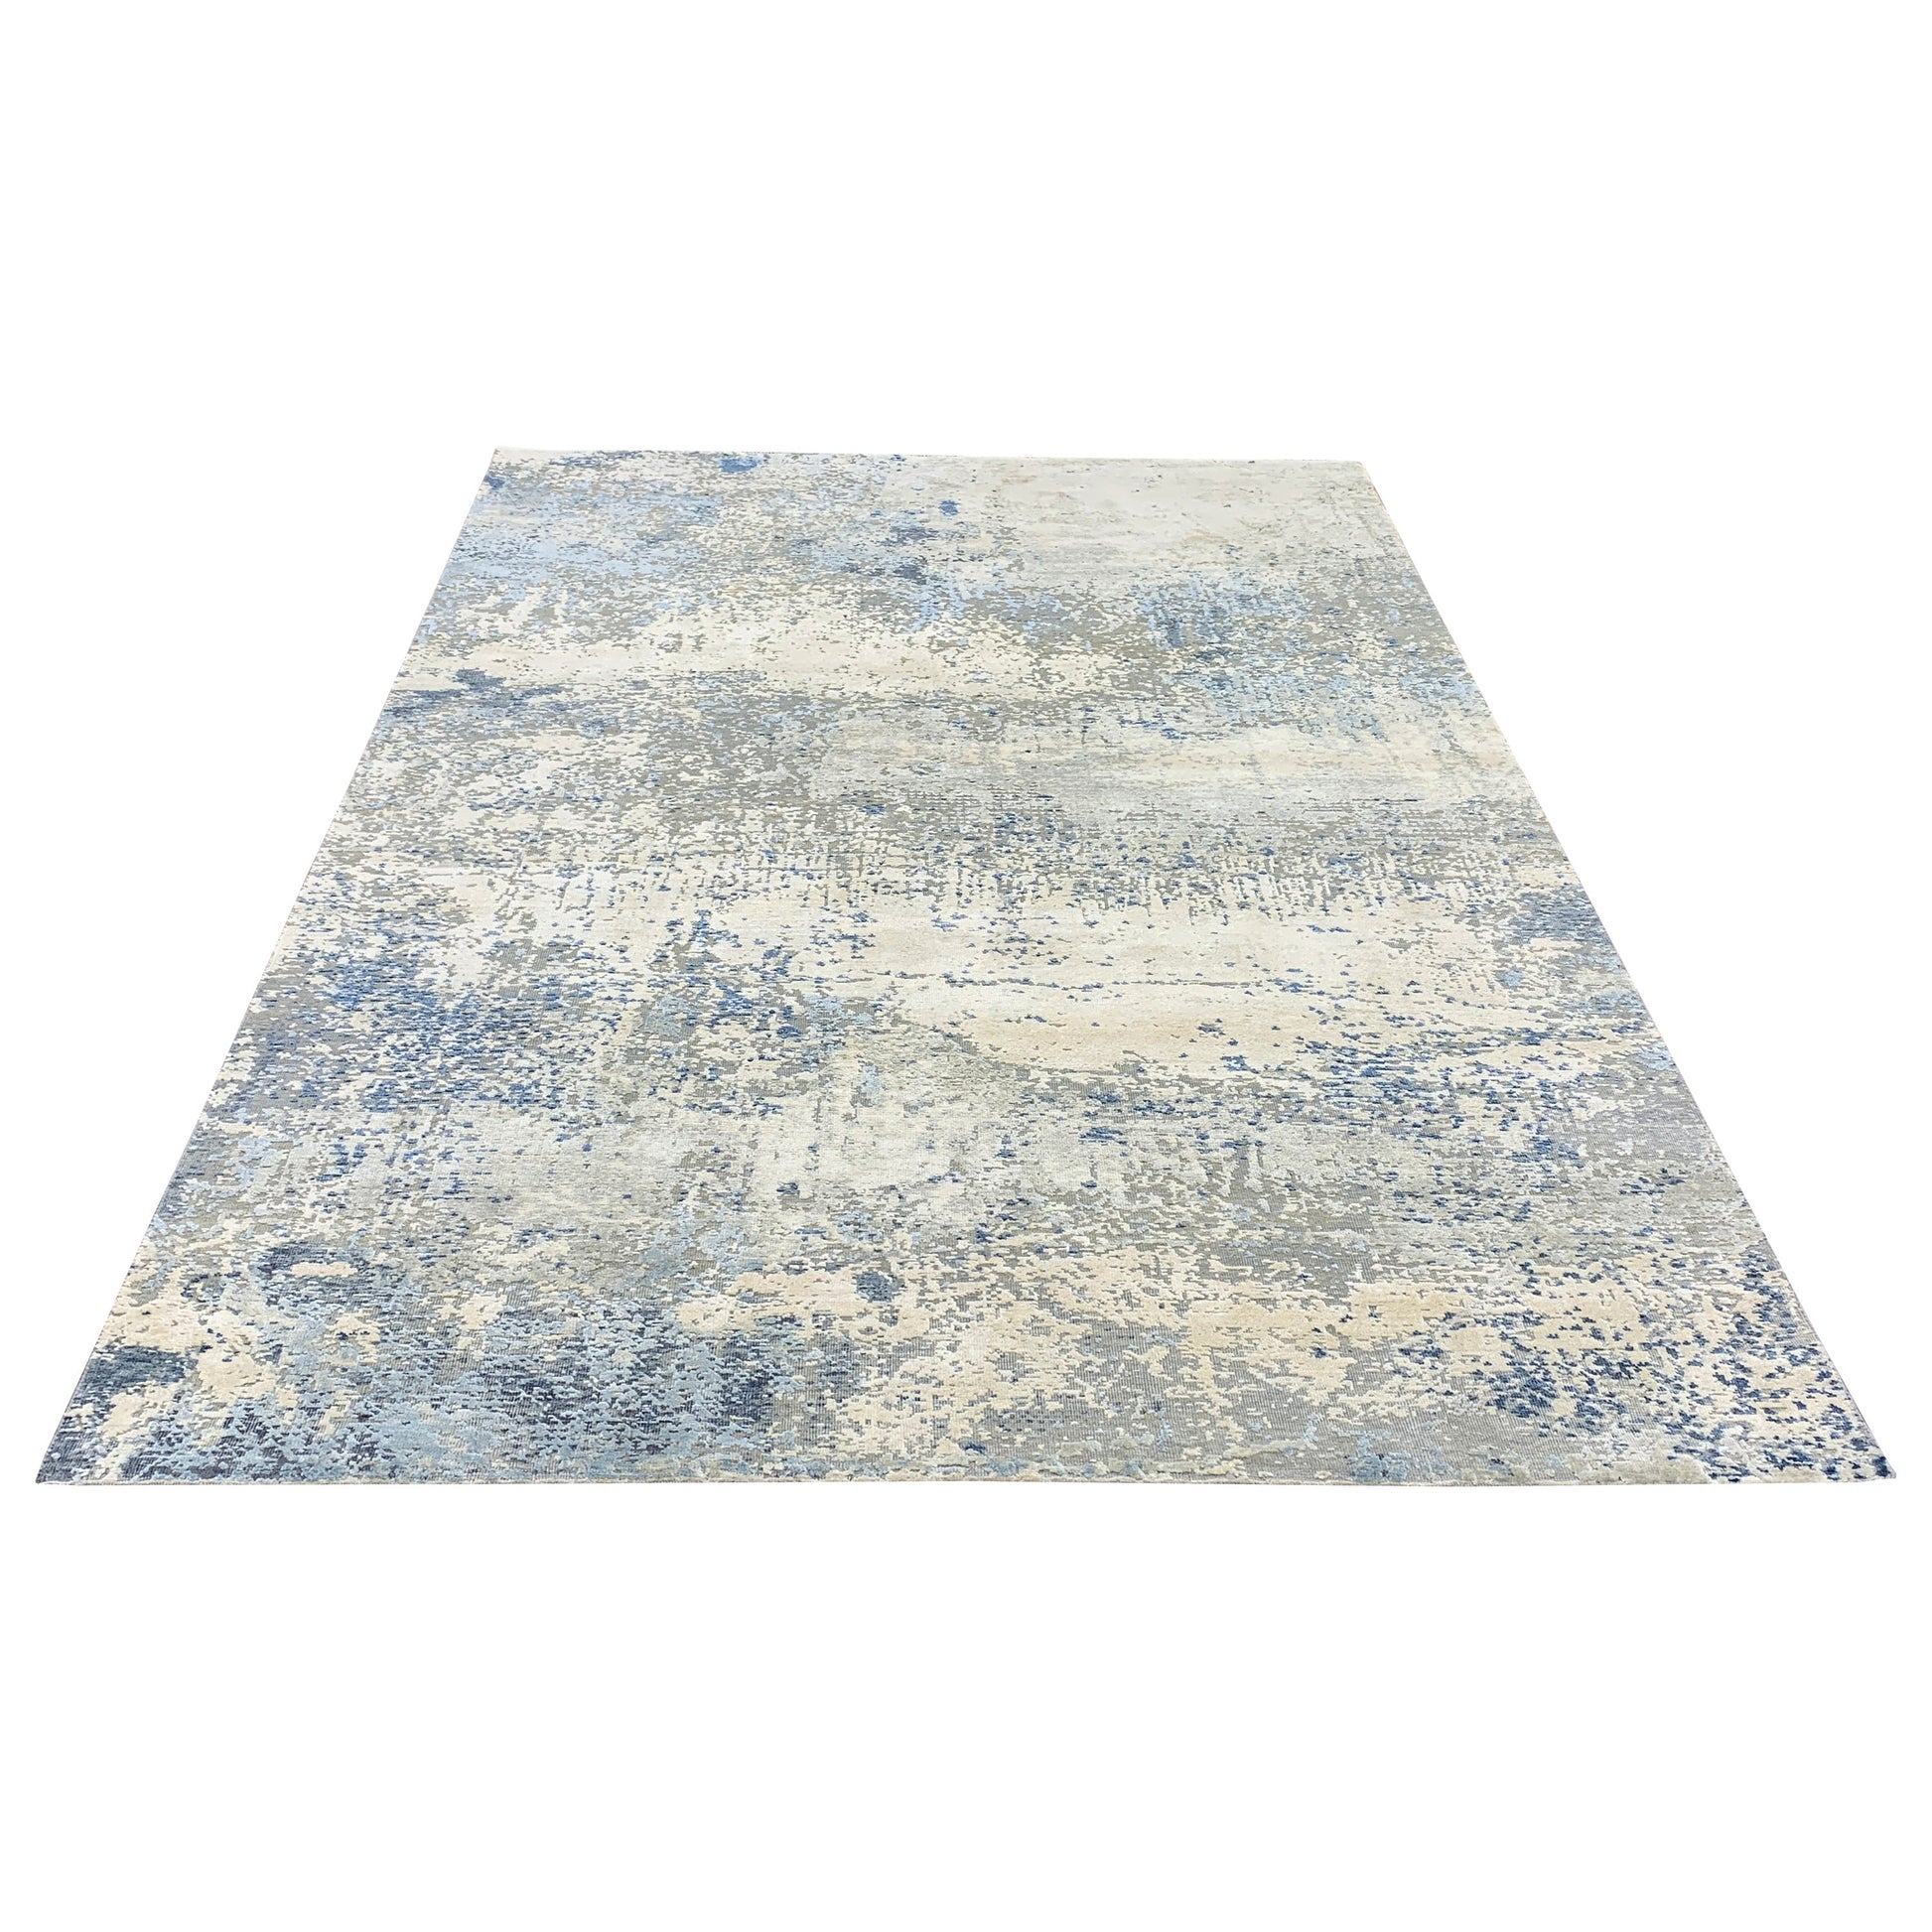 Get trendy with Ivory Blue and Ivory Silk and Wool Modern Textured Handknotted Area Rug - Modern Rugs available at Jaipur Oriental Rugs. Grab yours for $360.00 today!